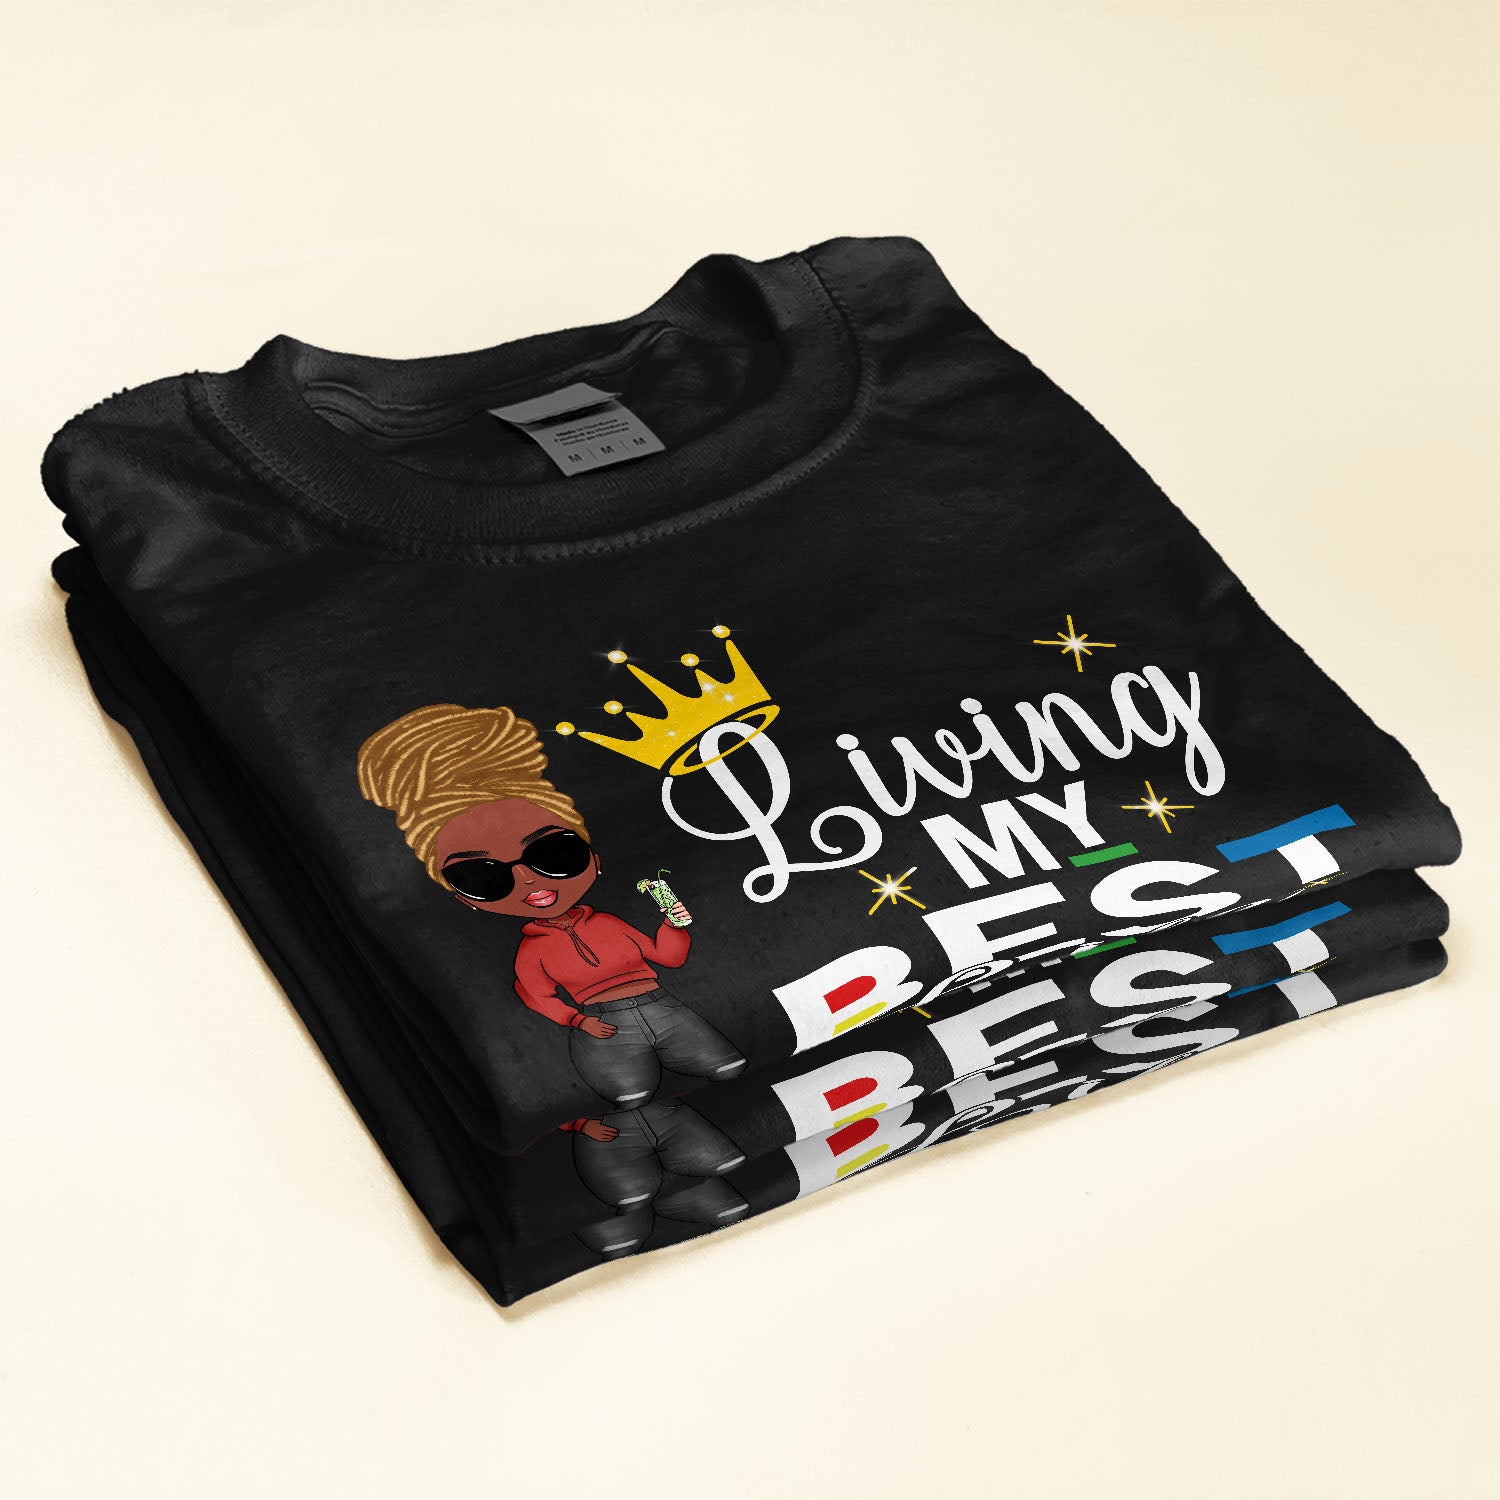 Living My Best Life - Personalized Shirt - Gift For Black Girl - Cartoon Girl